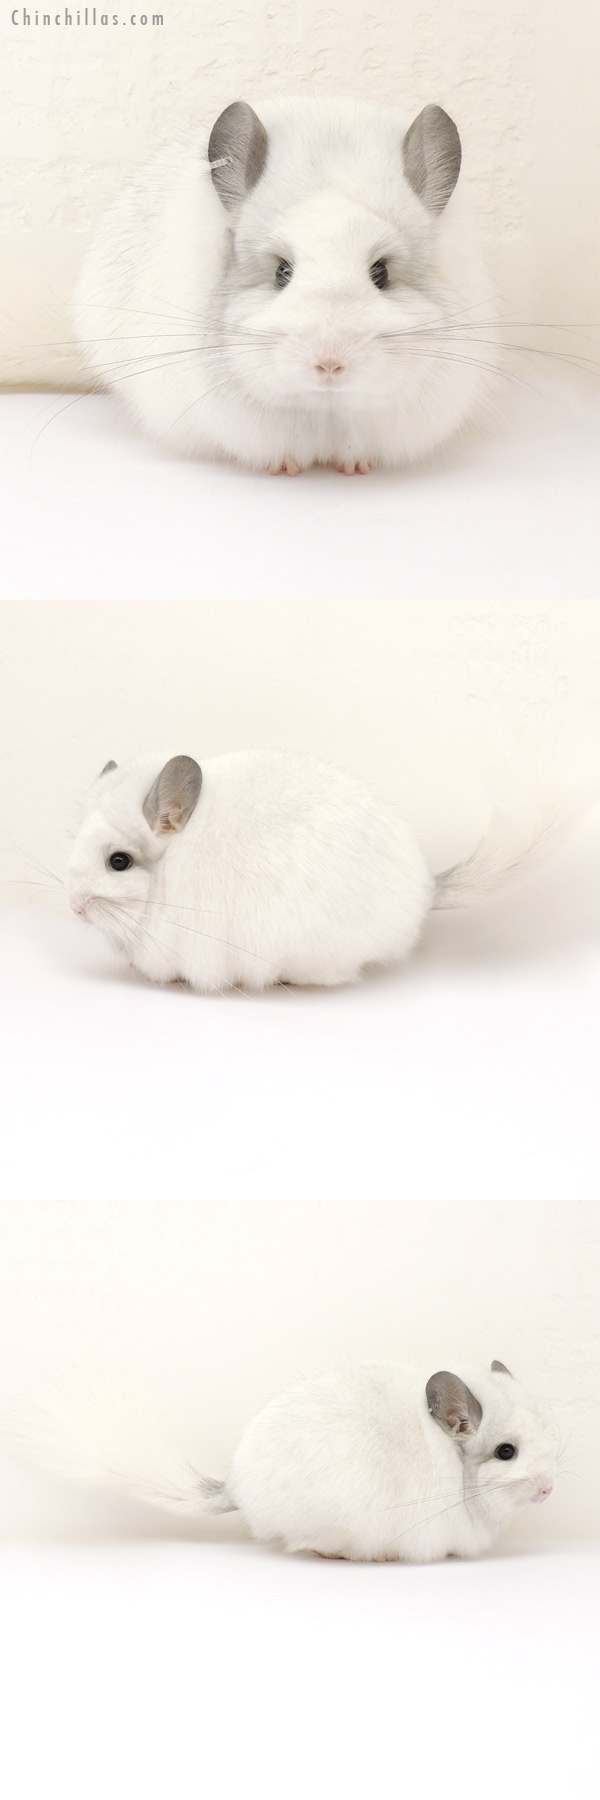 Chinchilla or related item offered for sale or export on Chinchillas.com - 13275 Exceptional White Mosaic Royal Persian Angora Female Chinchilla